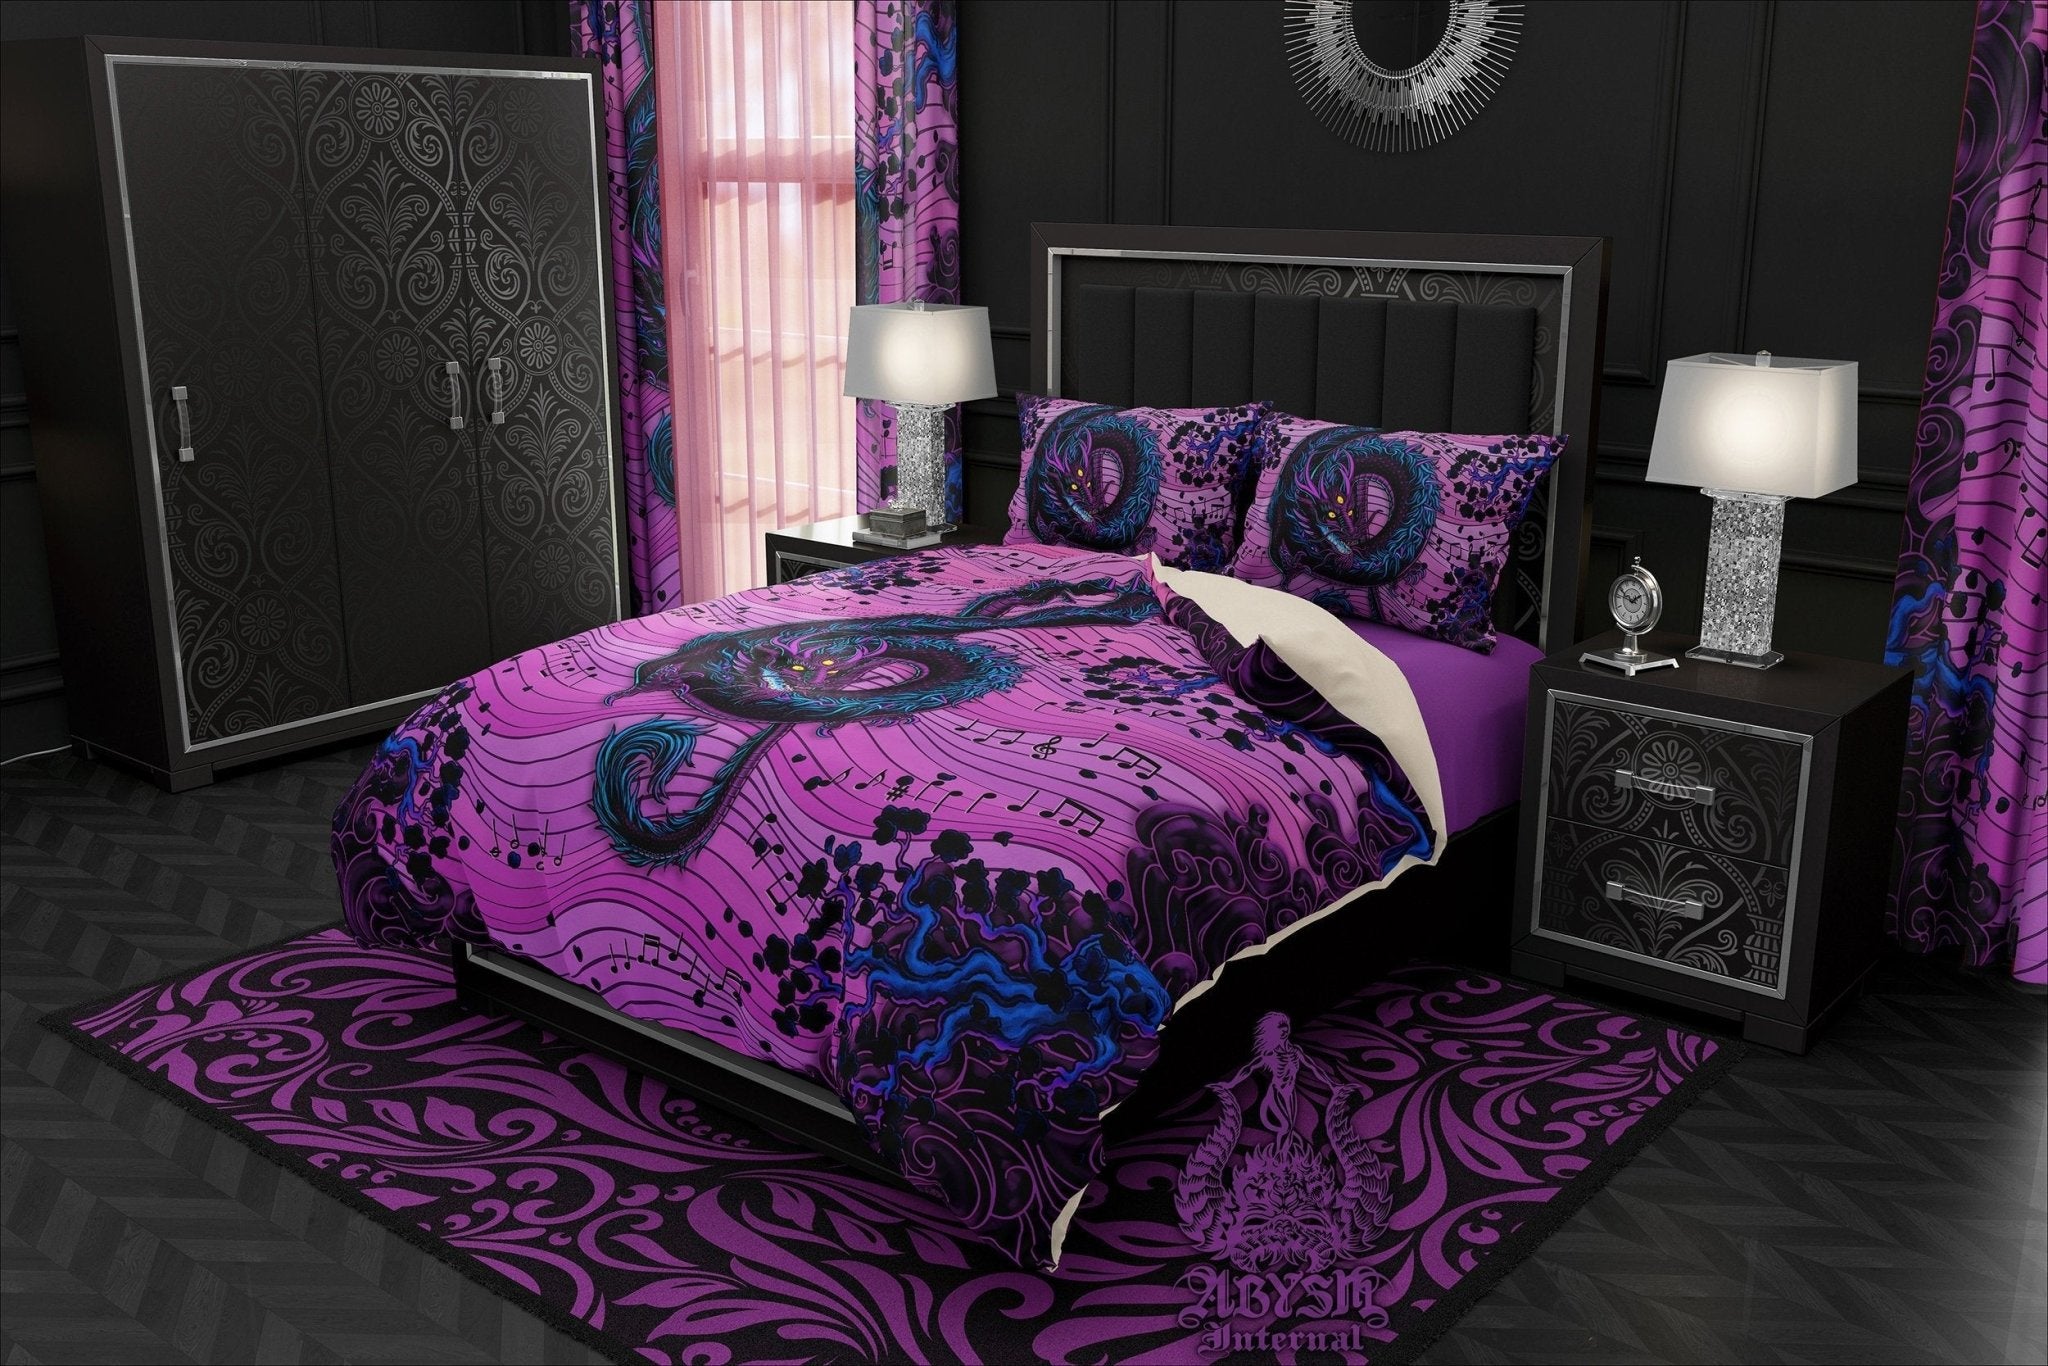 Pastel Goth Dragon Bedding Set, Comforter and Duvet, Music Bed Cover and Bedroom Decor, King, Queen and Twin Size - Black and Purple - Abysm Internal